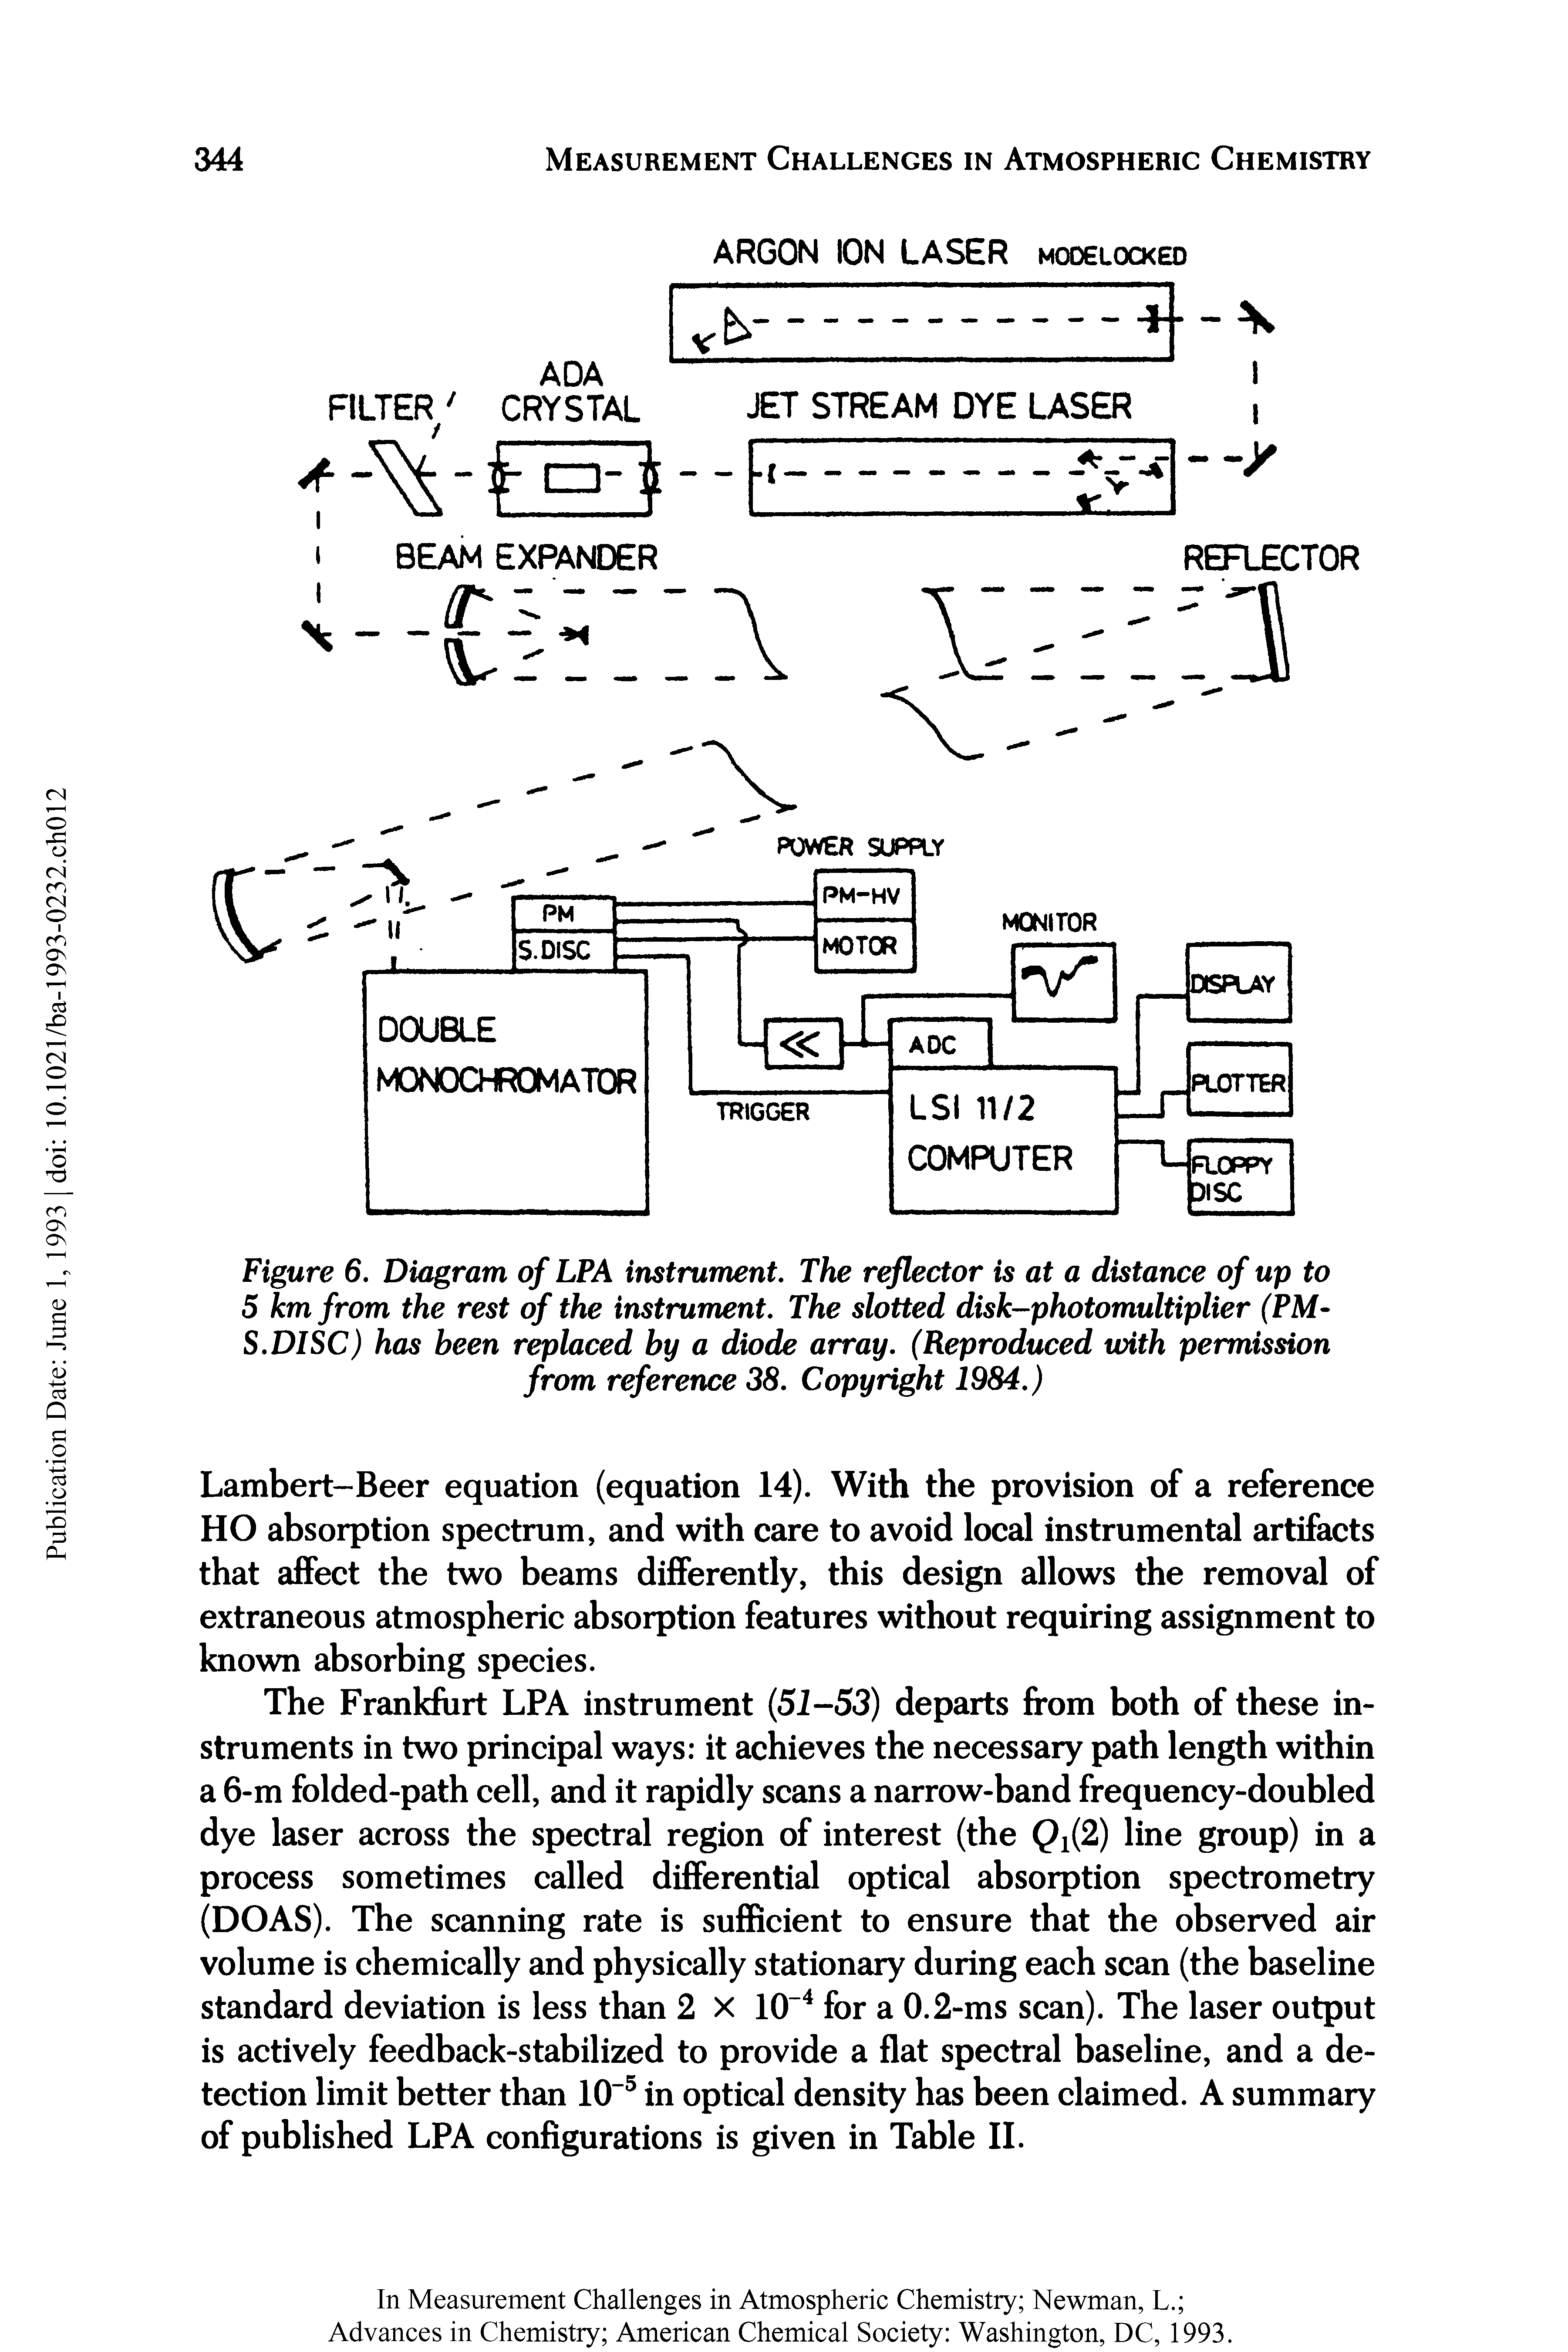 Figure 6. Diagram of LPA instrument. The reflector is at a distance of up to 5 km from the rest of the instrument. The slotted disk-photomultiplier (PM-S.DISC) has been replaced by a diode array. (Reproduced with permission from reference 38. Copyright 1984.)...